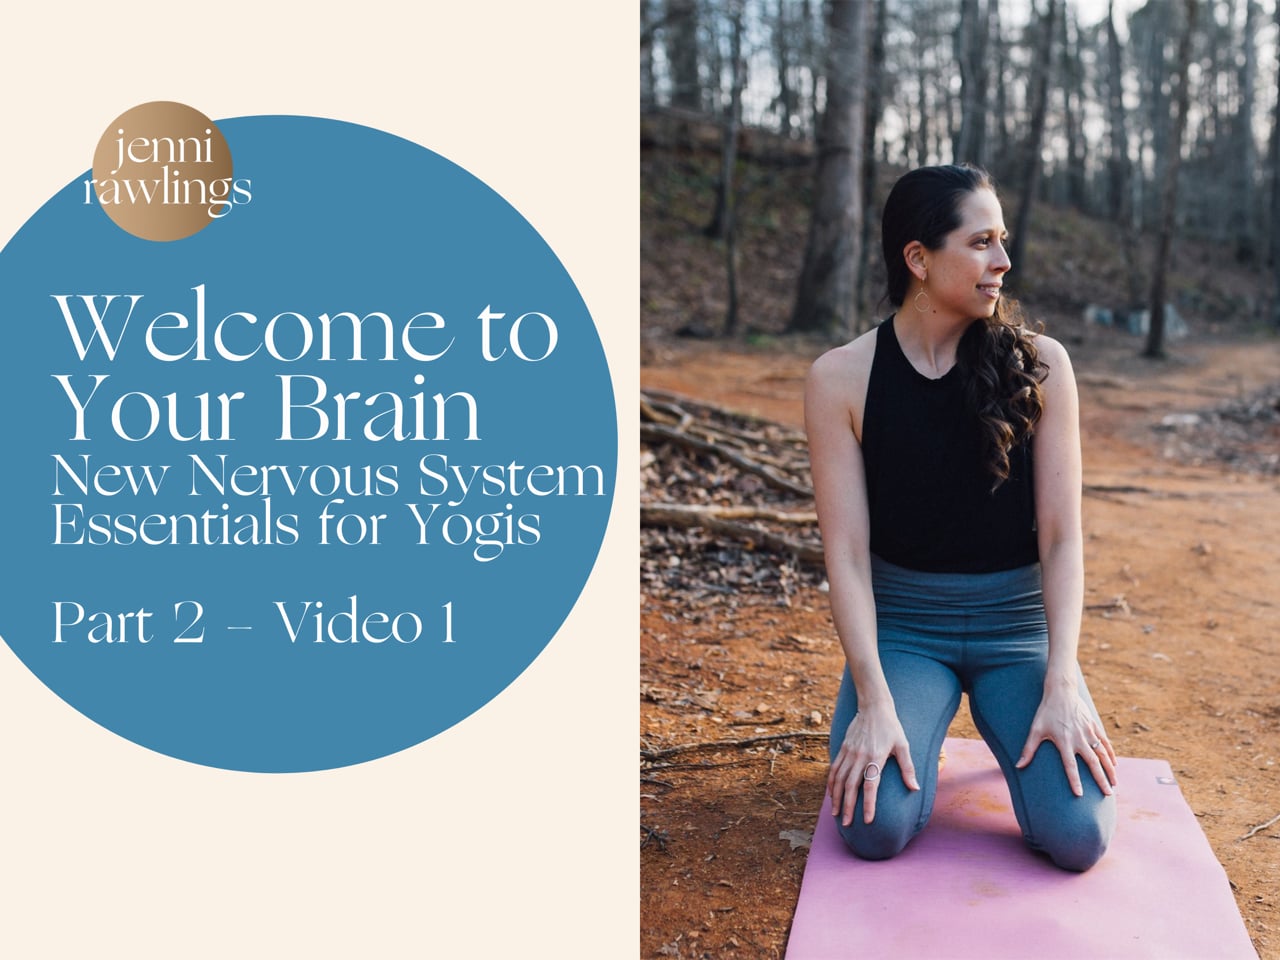 Part 2 Video 1 – Welcome to Your Brain